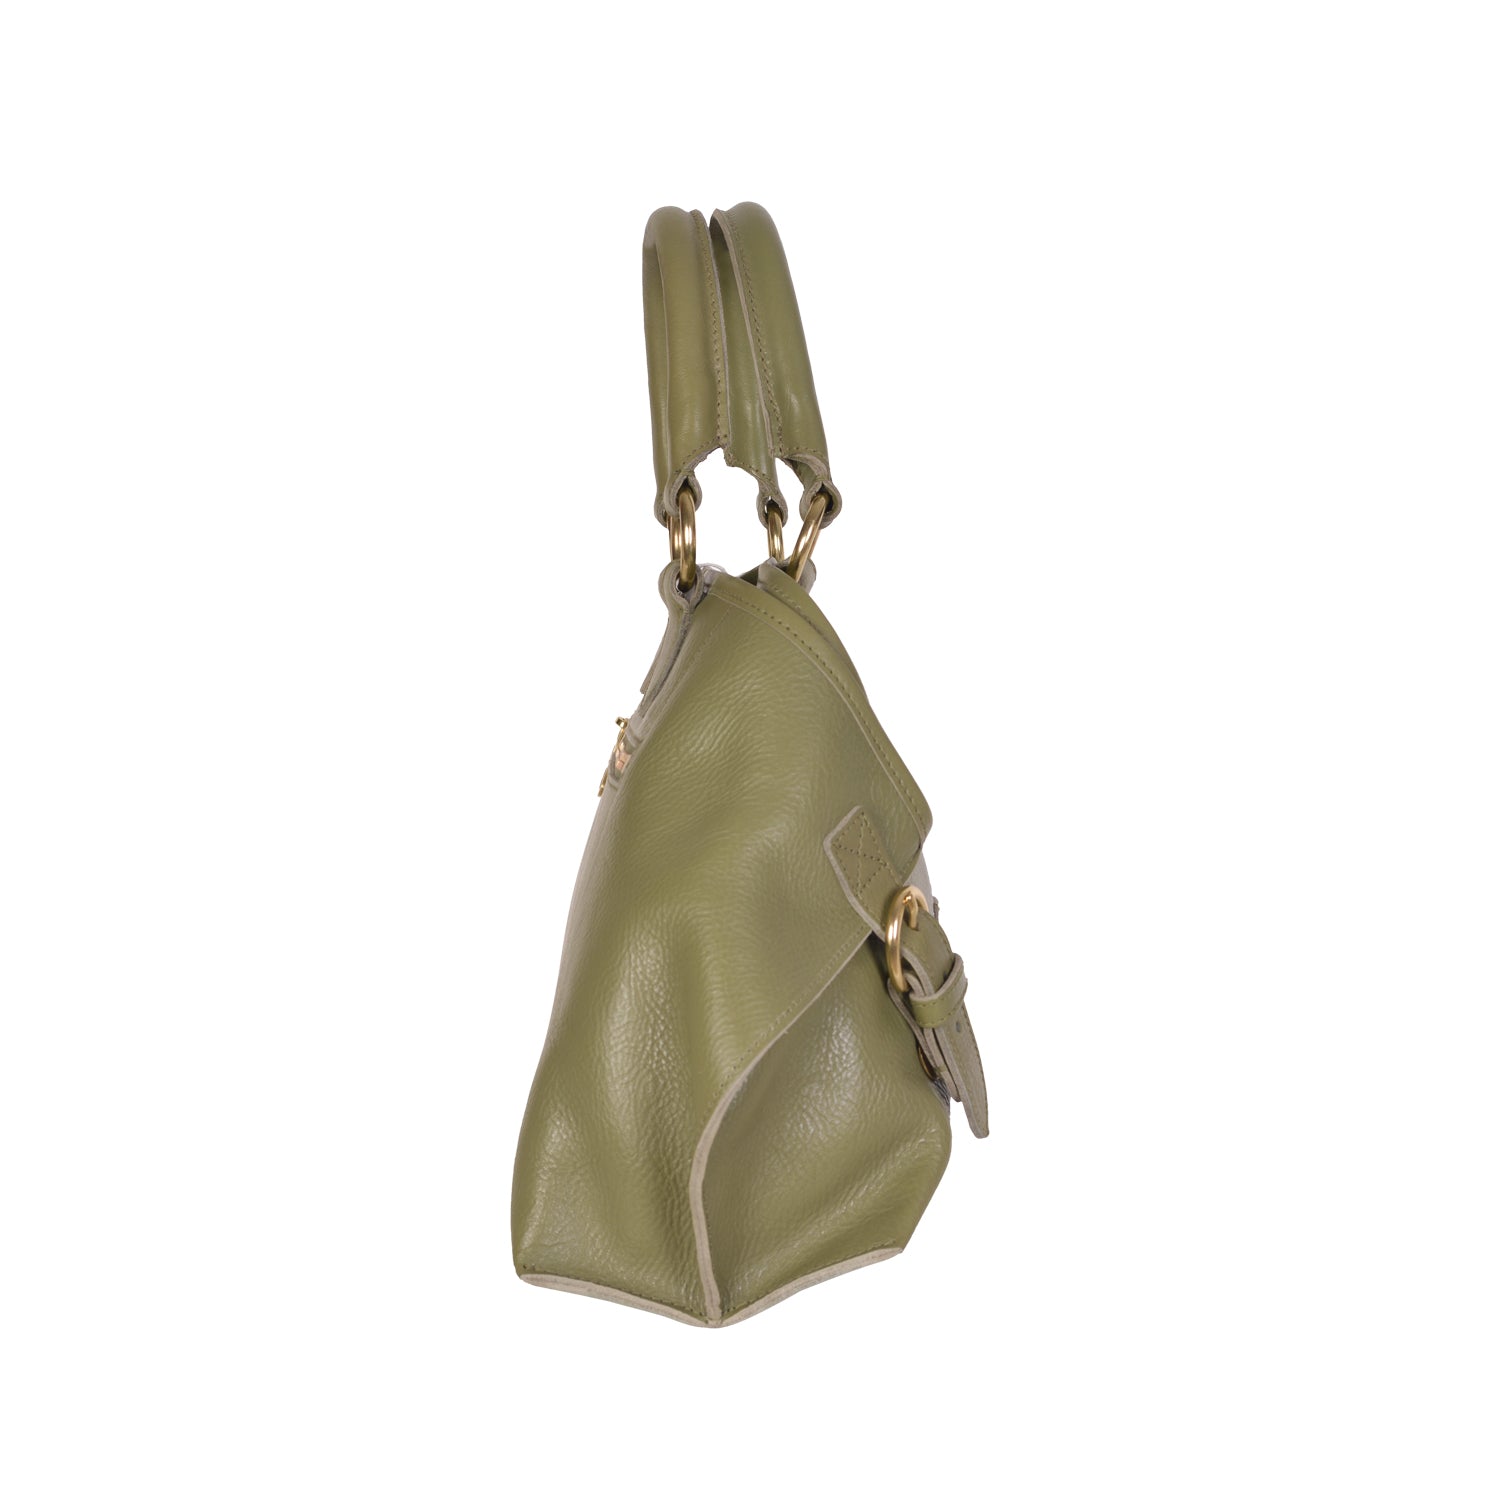 NEW IL BISONTE WOMEN'S SAVAGE COLLECTION HANDBAG IN OLIVE LEATHER